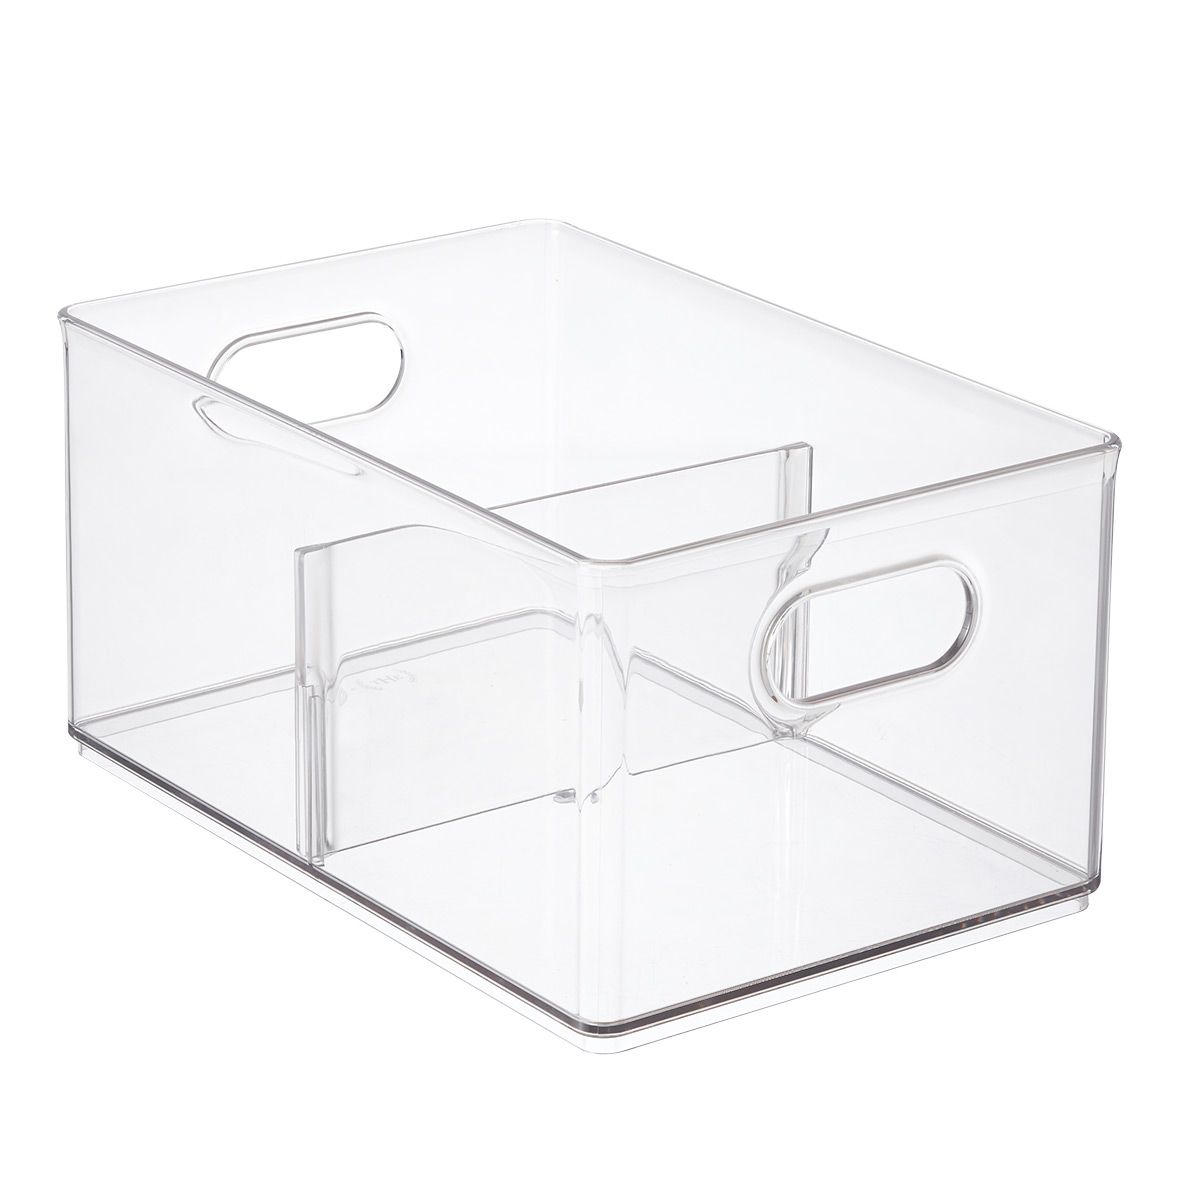 T.H.E. Divided Freezer Bin | The Container Store